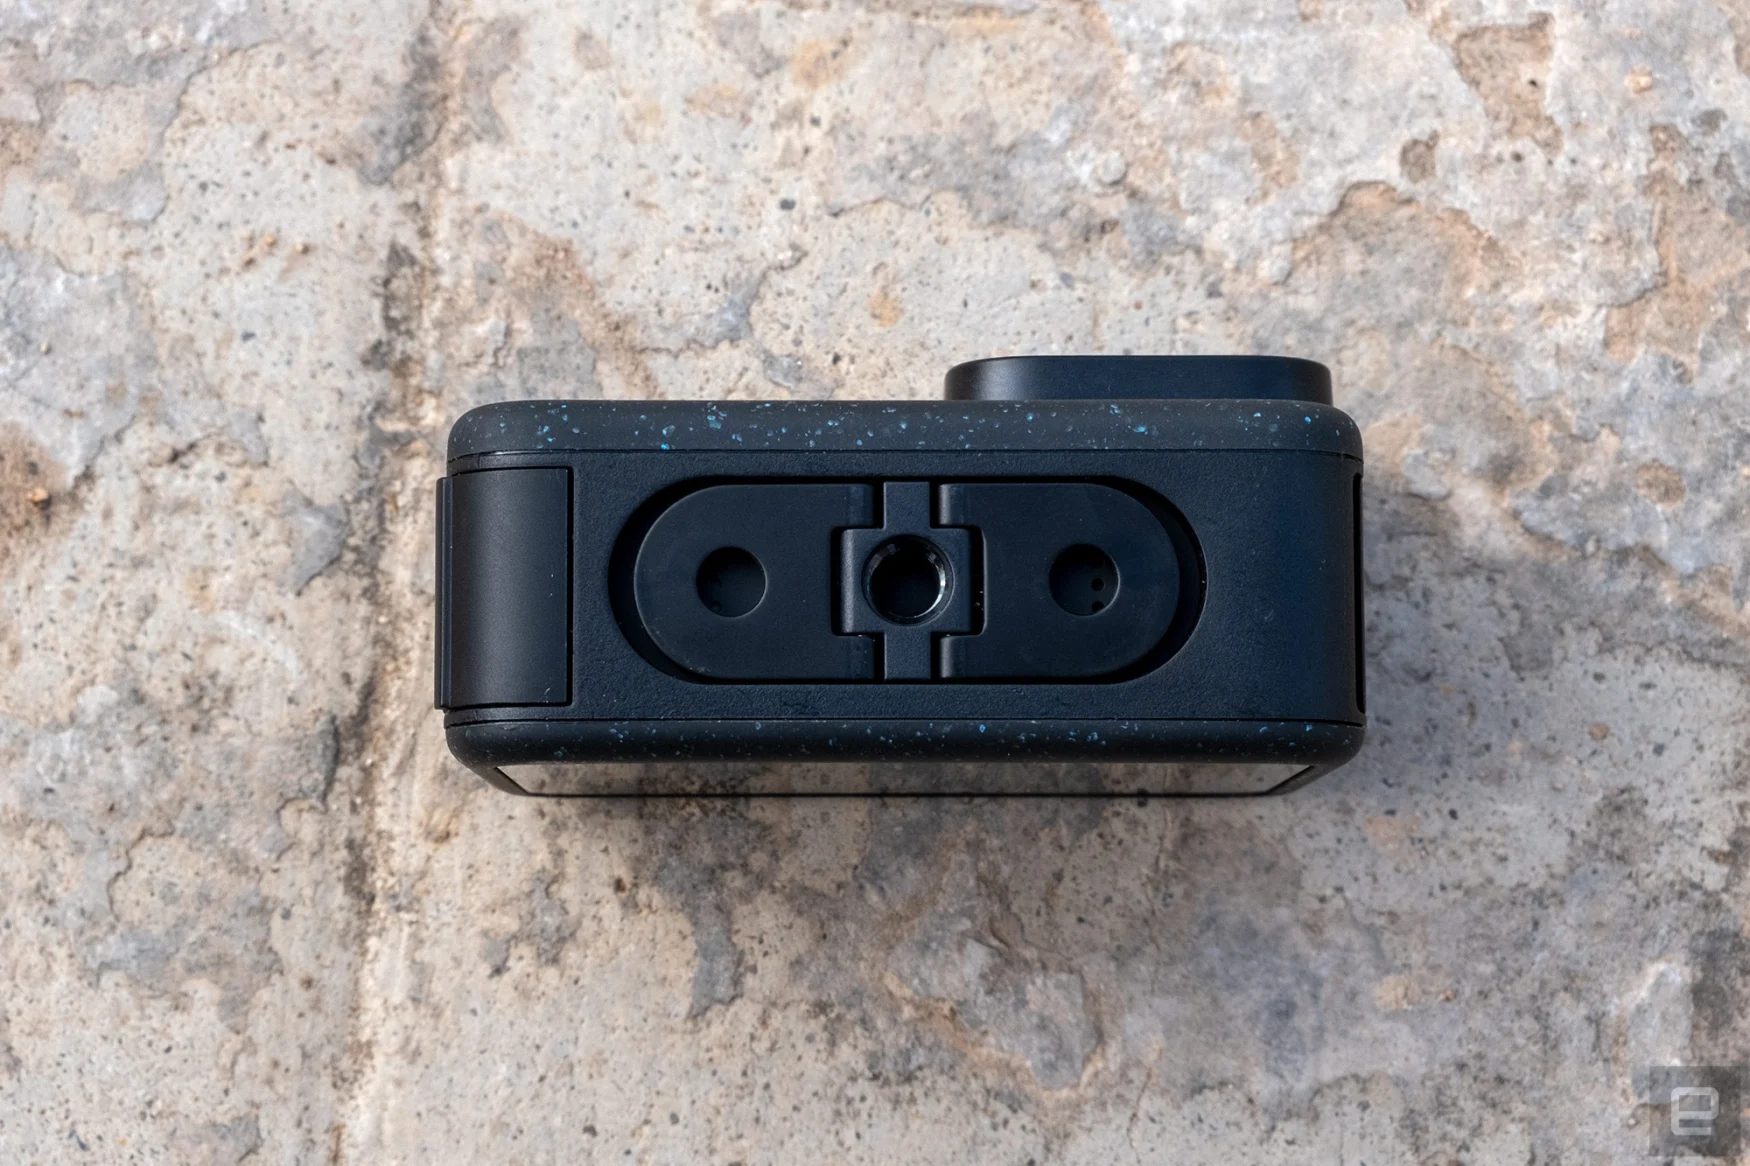 The underside of the GoPro Hero 12 Black is shown revealing the new standard tripod mount.